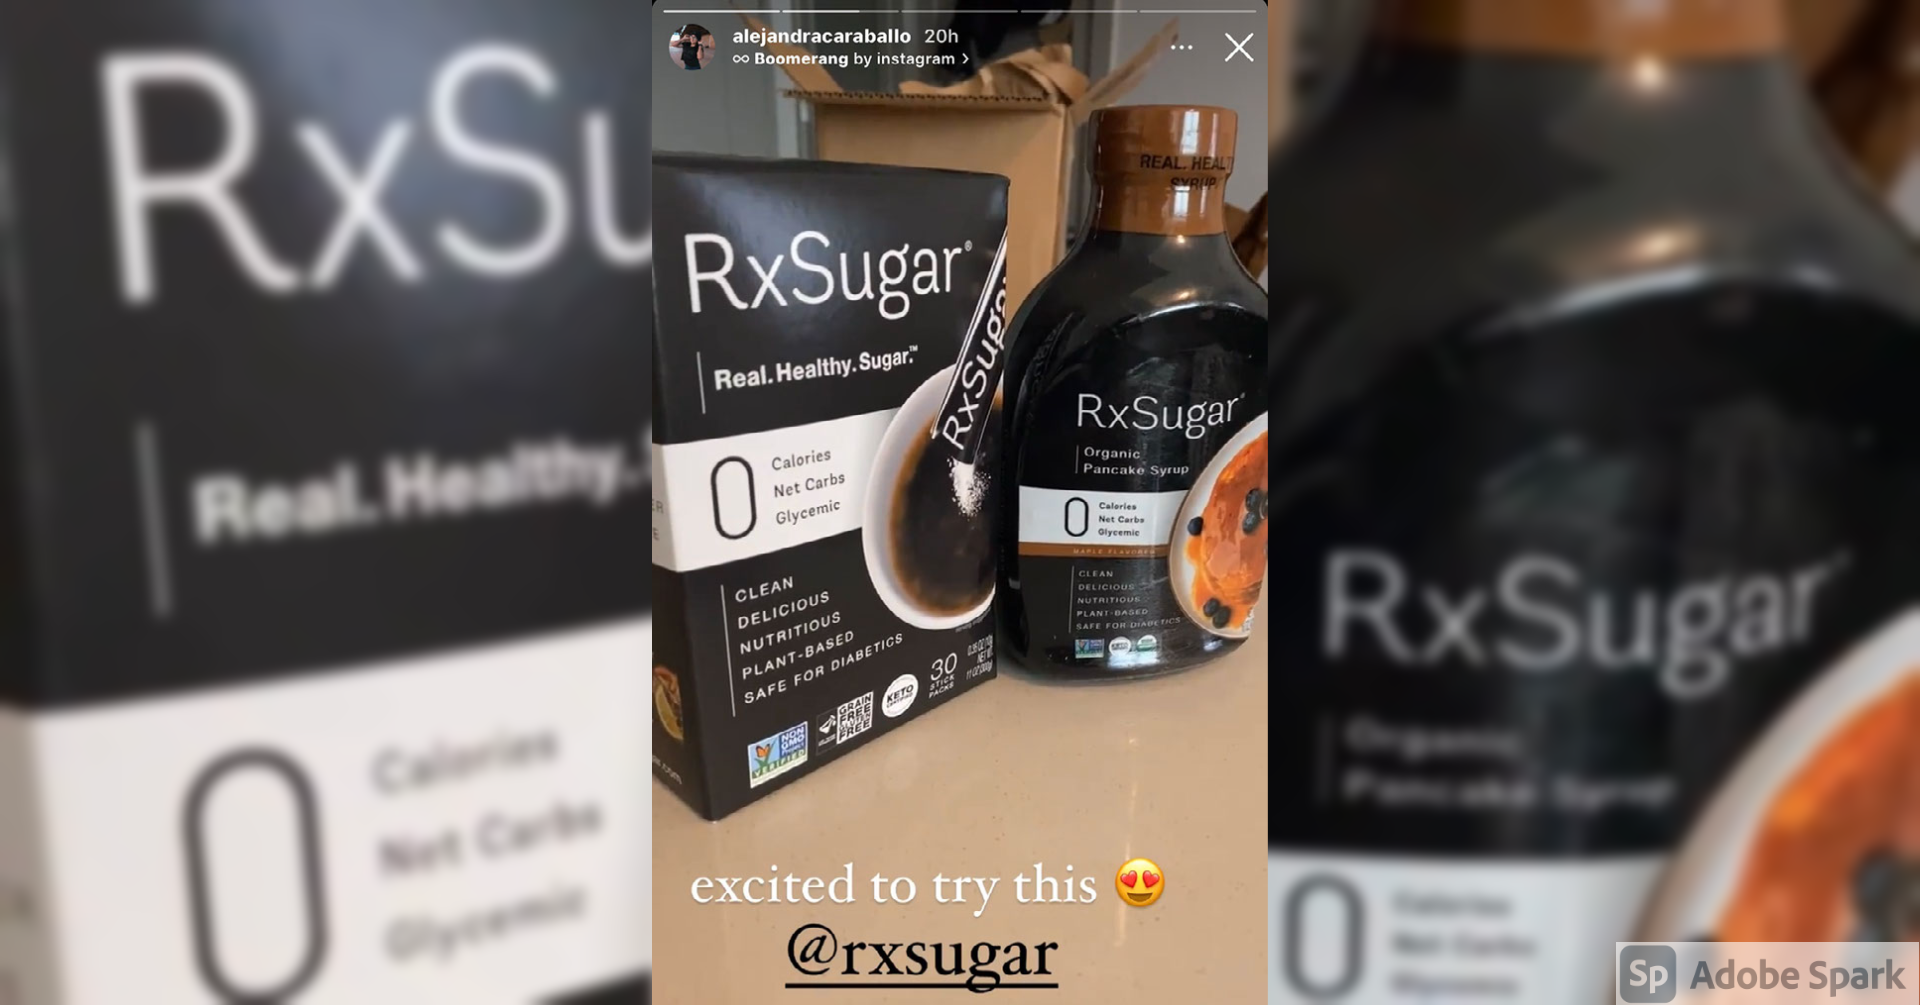 Alejandra Caraballo Starting Her Day Off Right With RxSugar Sugar Stick Pack & Pancake Syrup